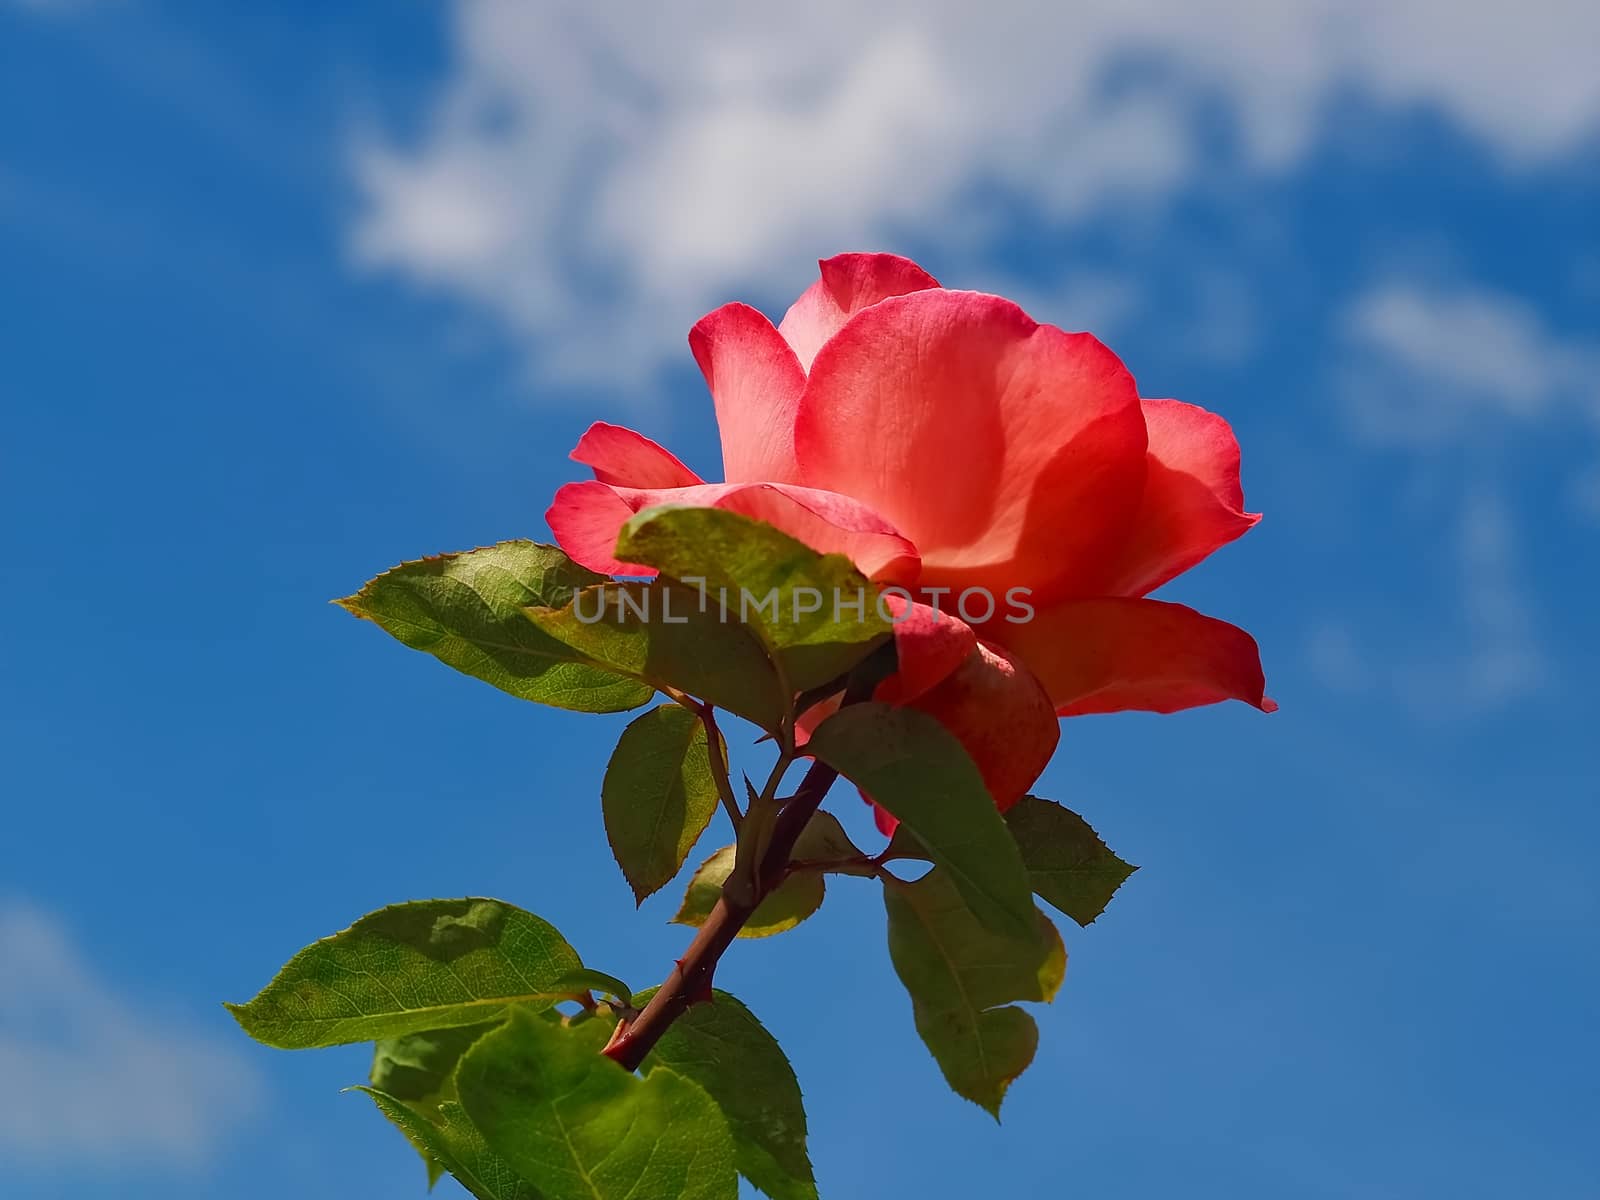 Macro of a red rose in front of blue sky